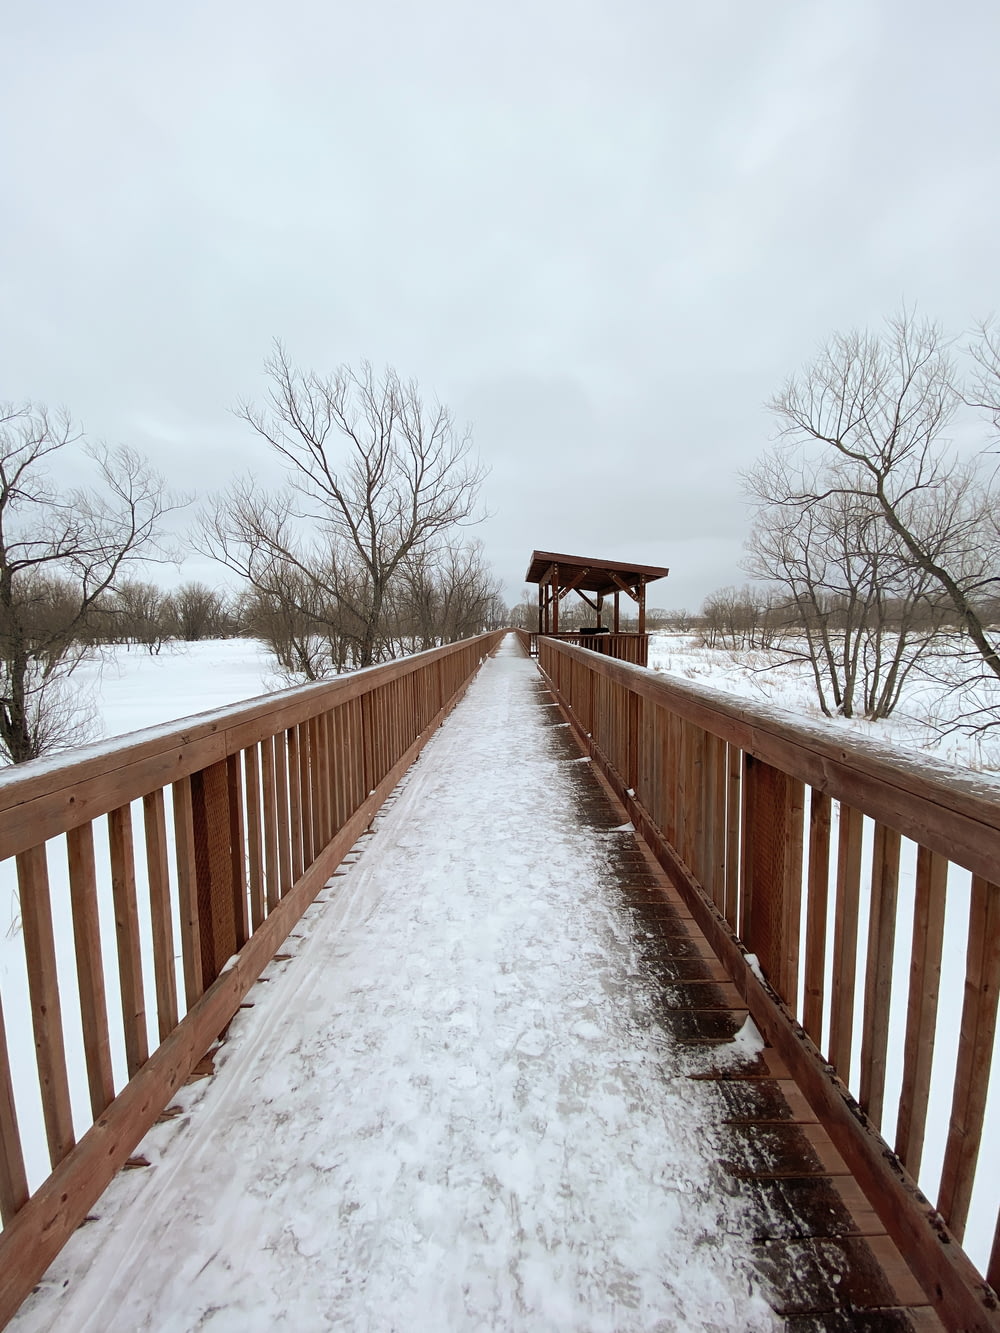 a wooden bridge with snow on the ground